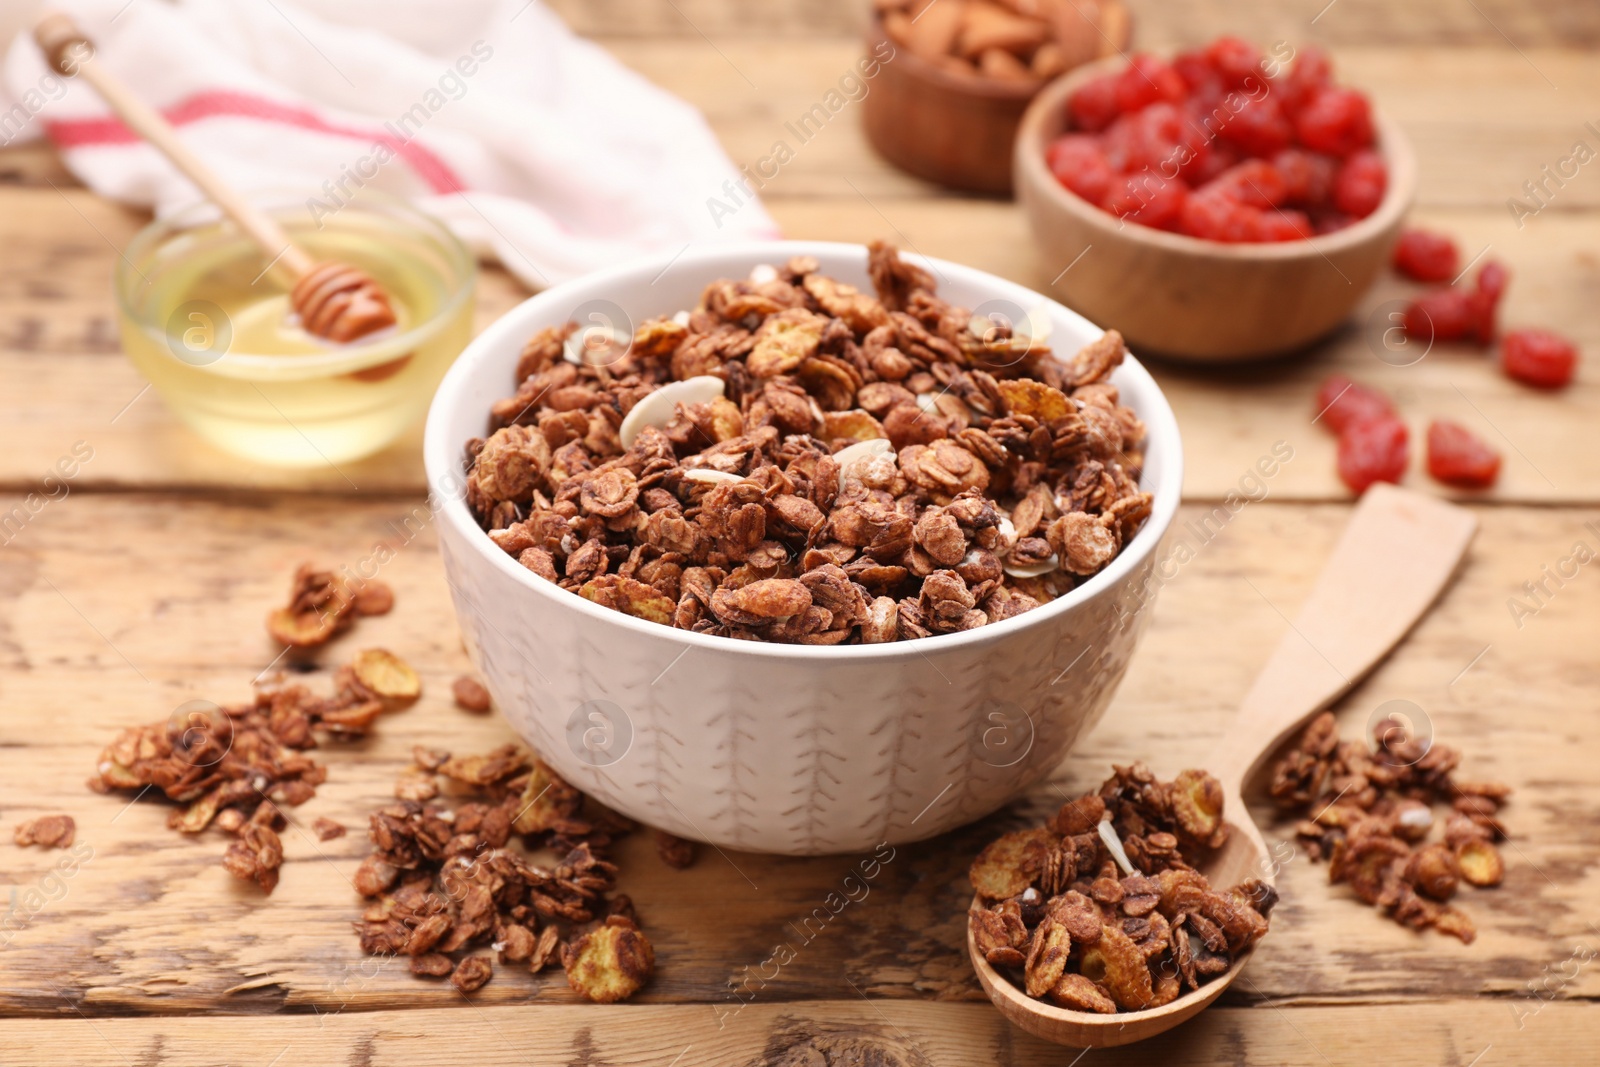 Photo of Tasty granola served with nuts and dry fruits on wooden table